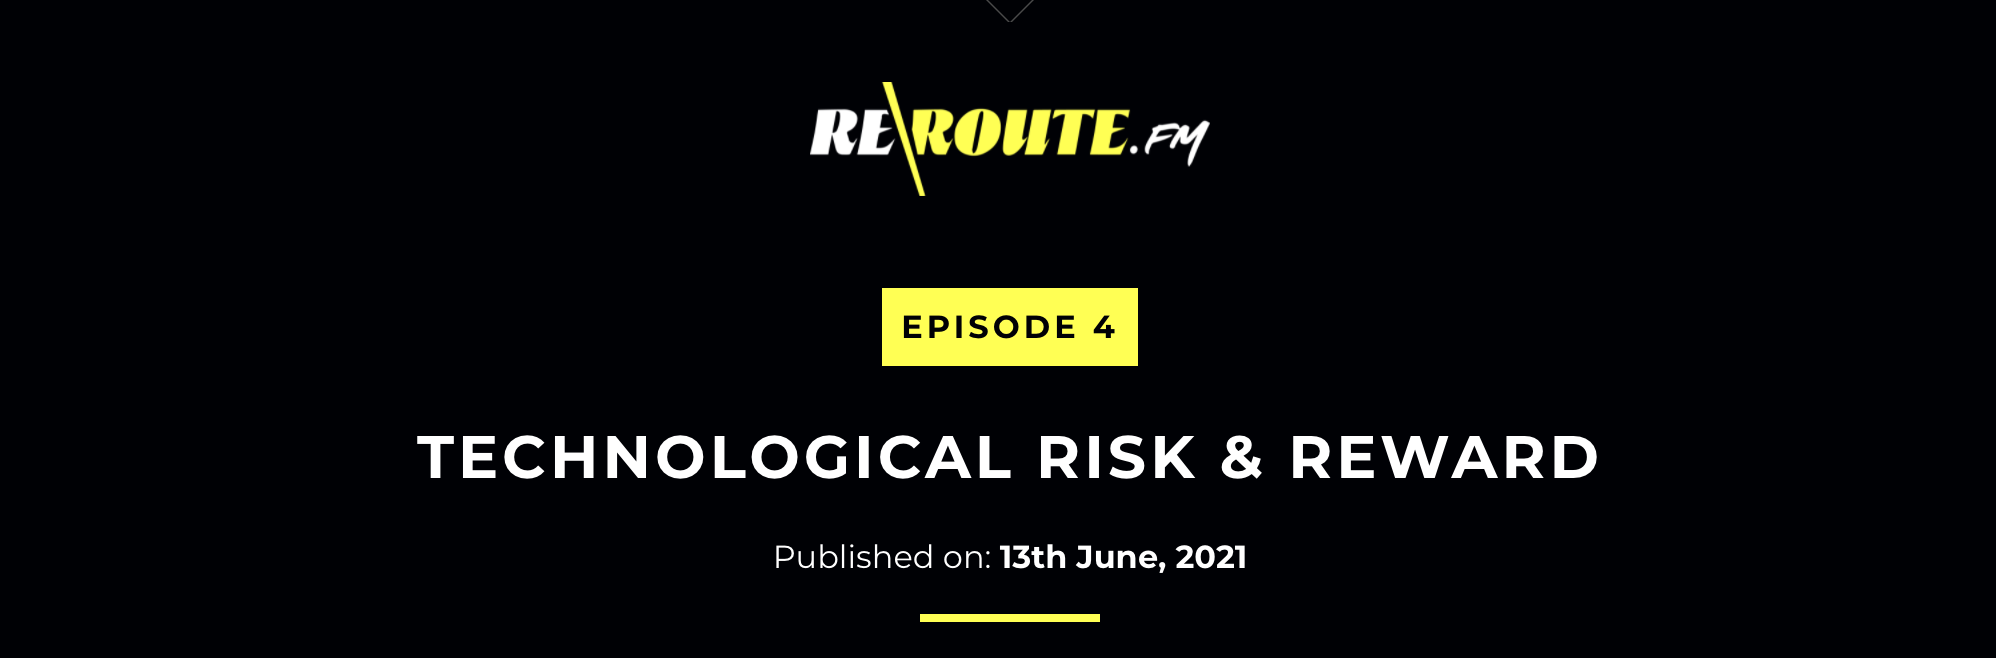 Reroute Podcast